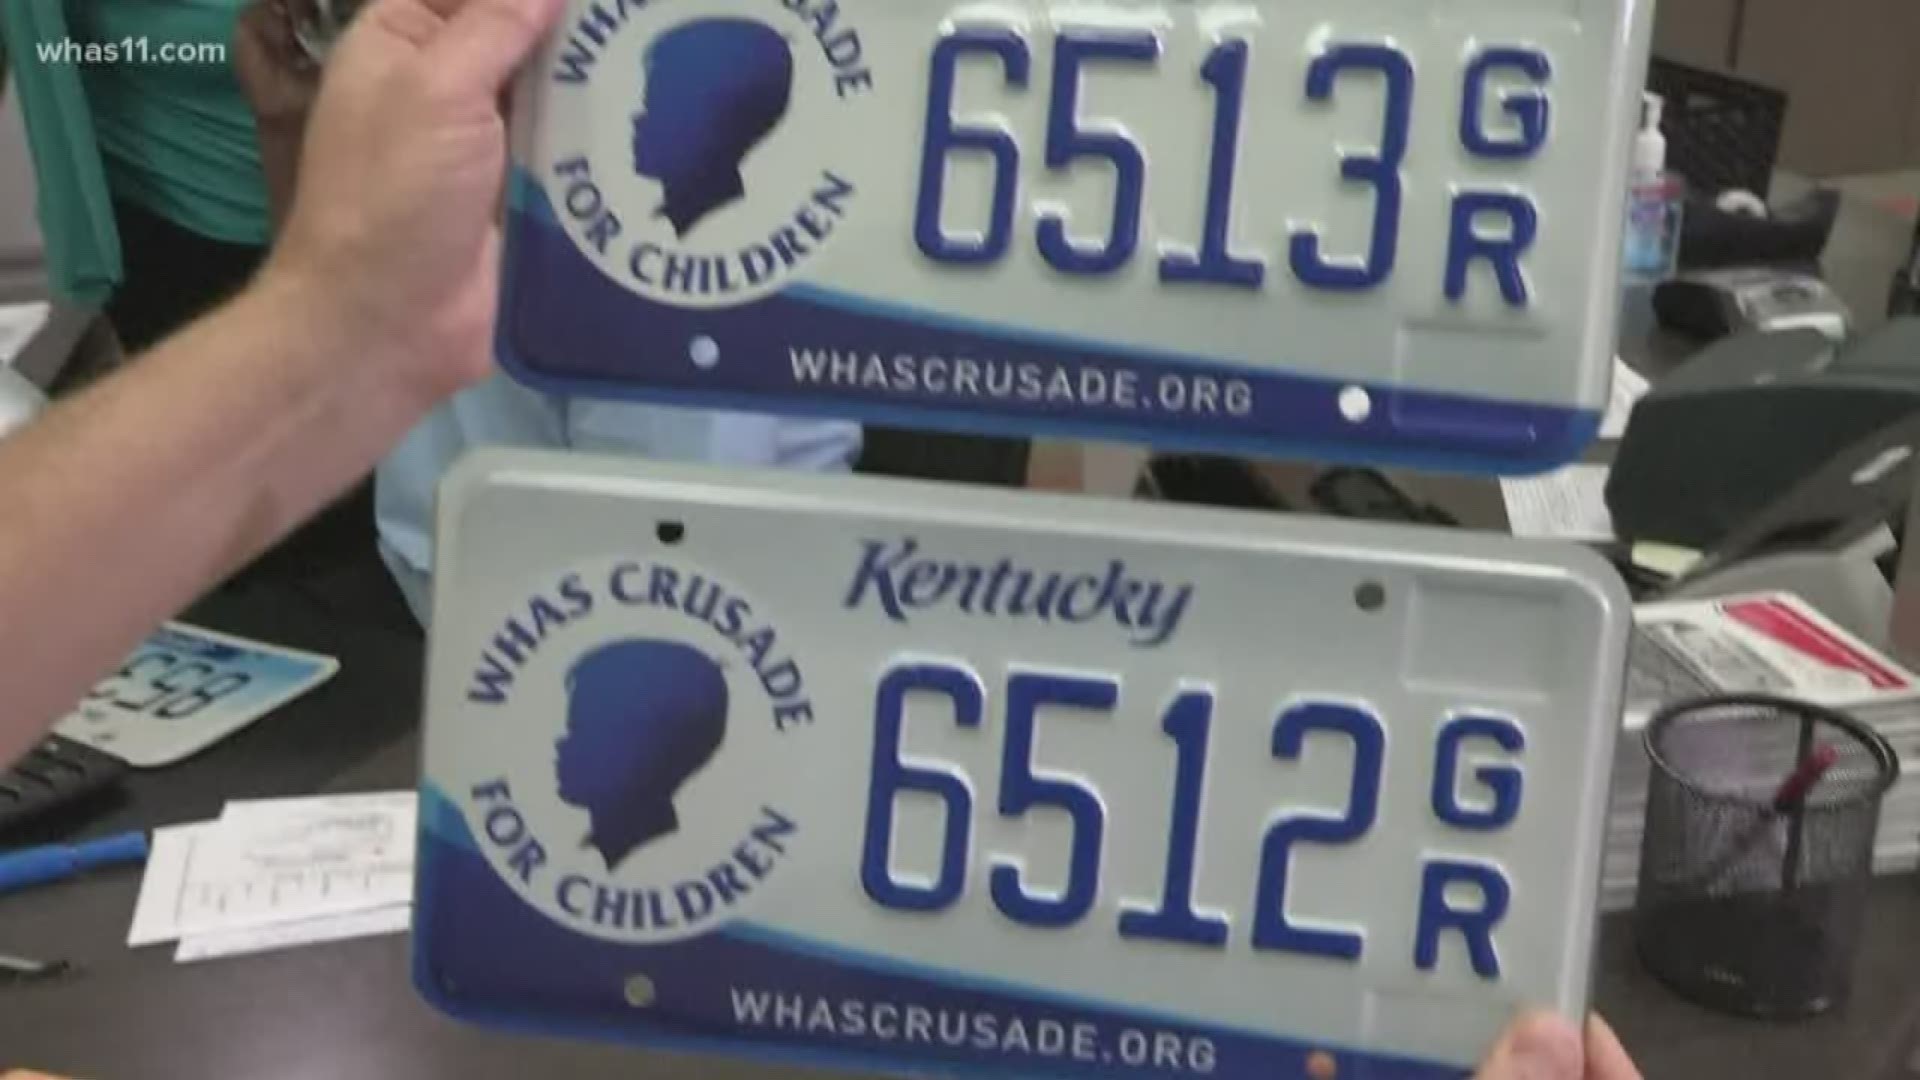 Changes to Kentucky’s current and future special license plates to take